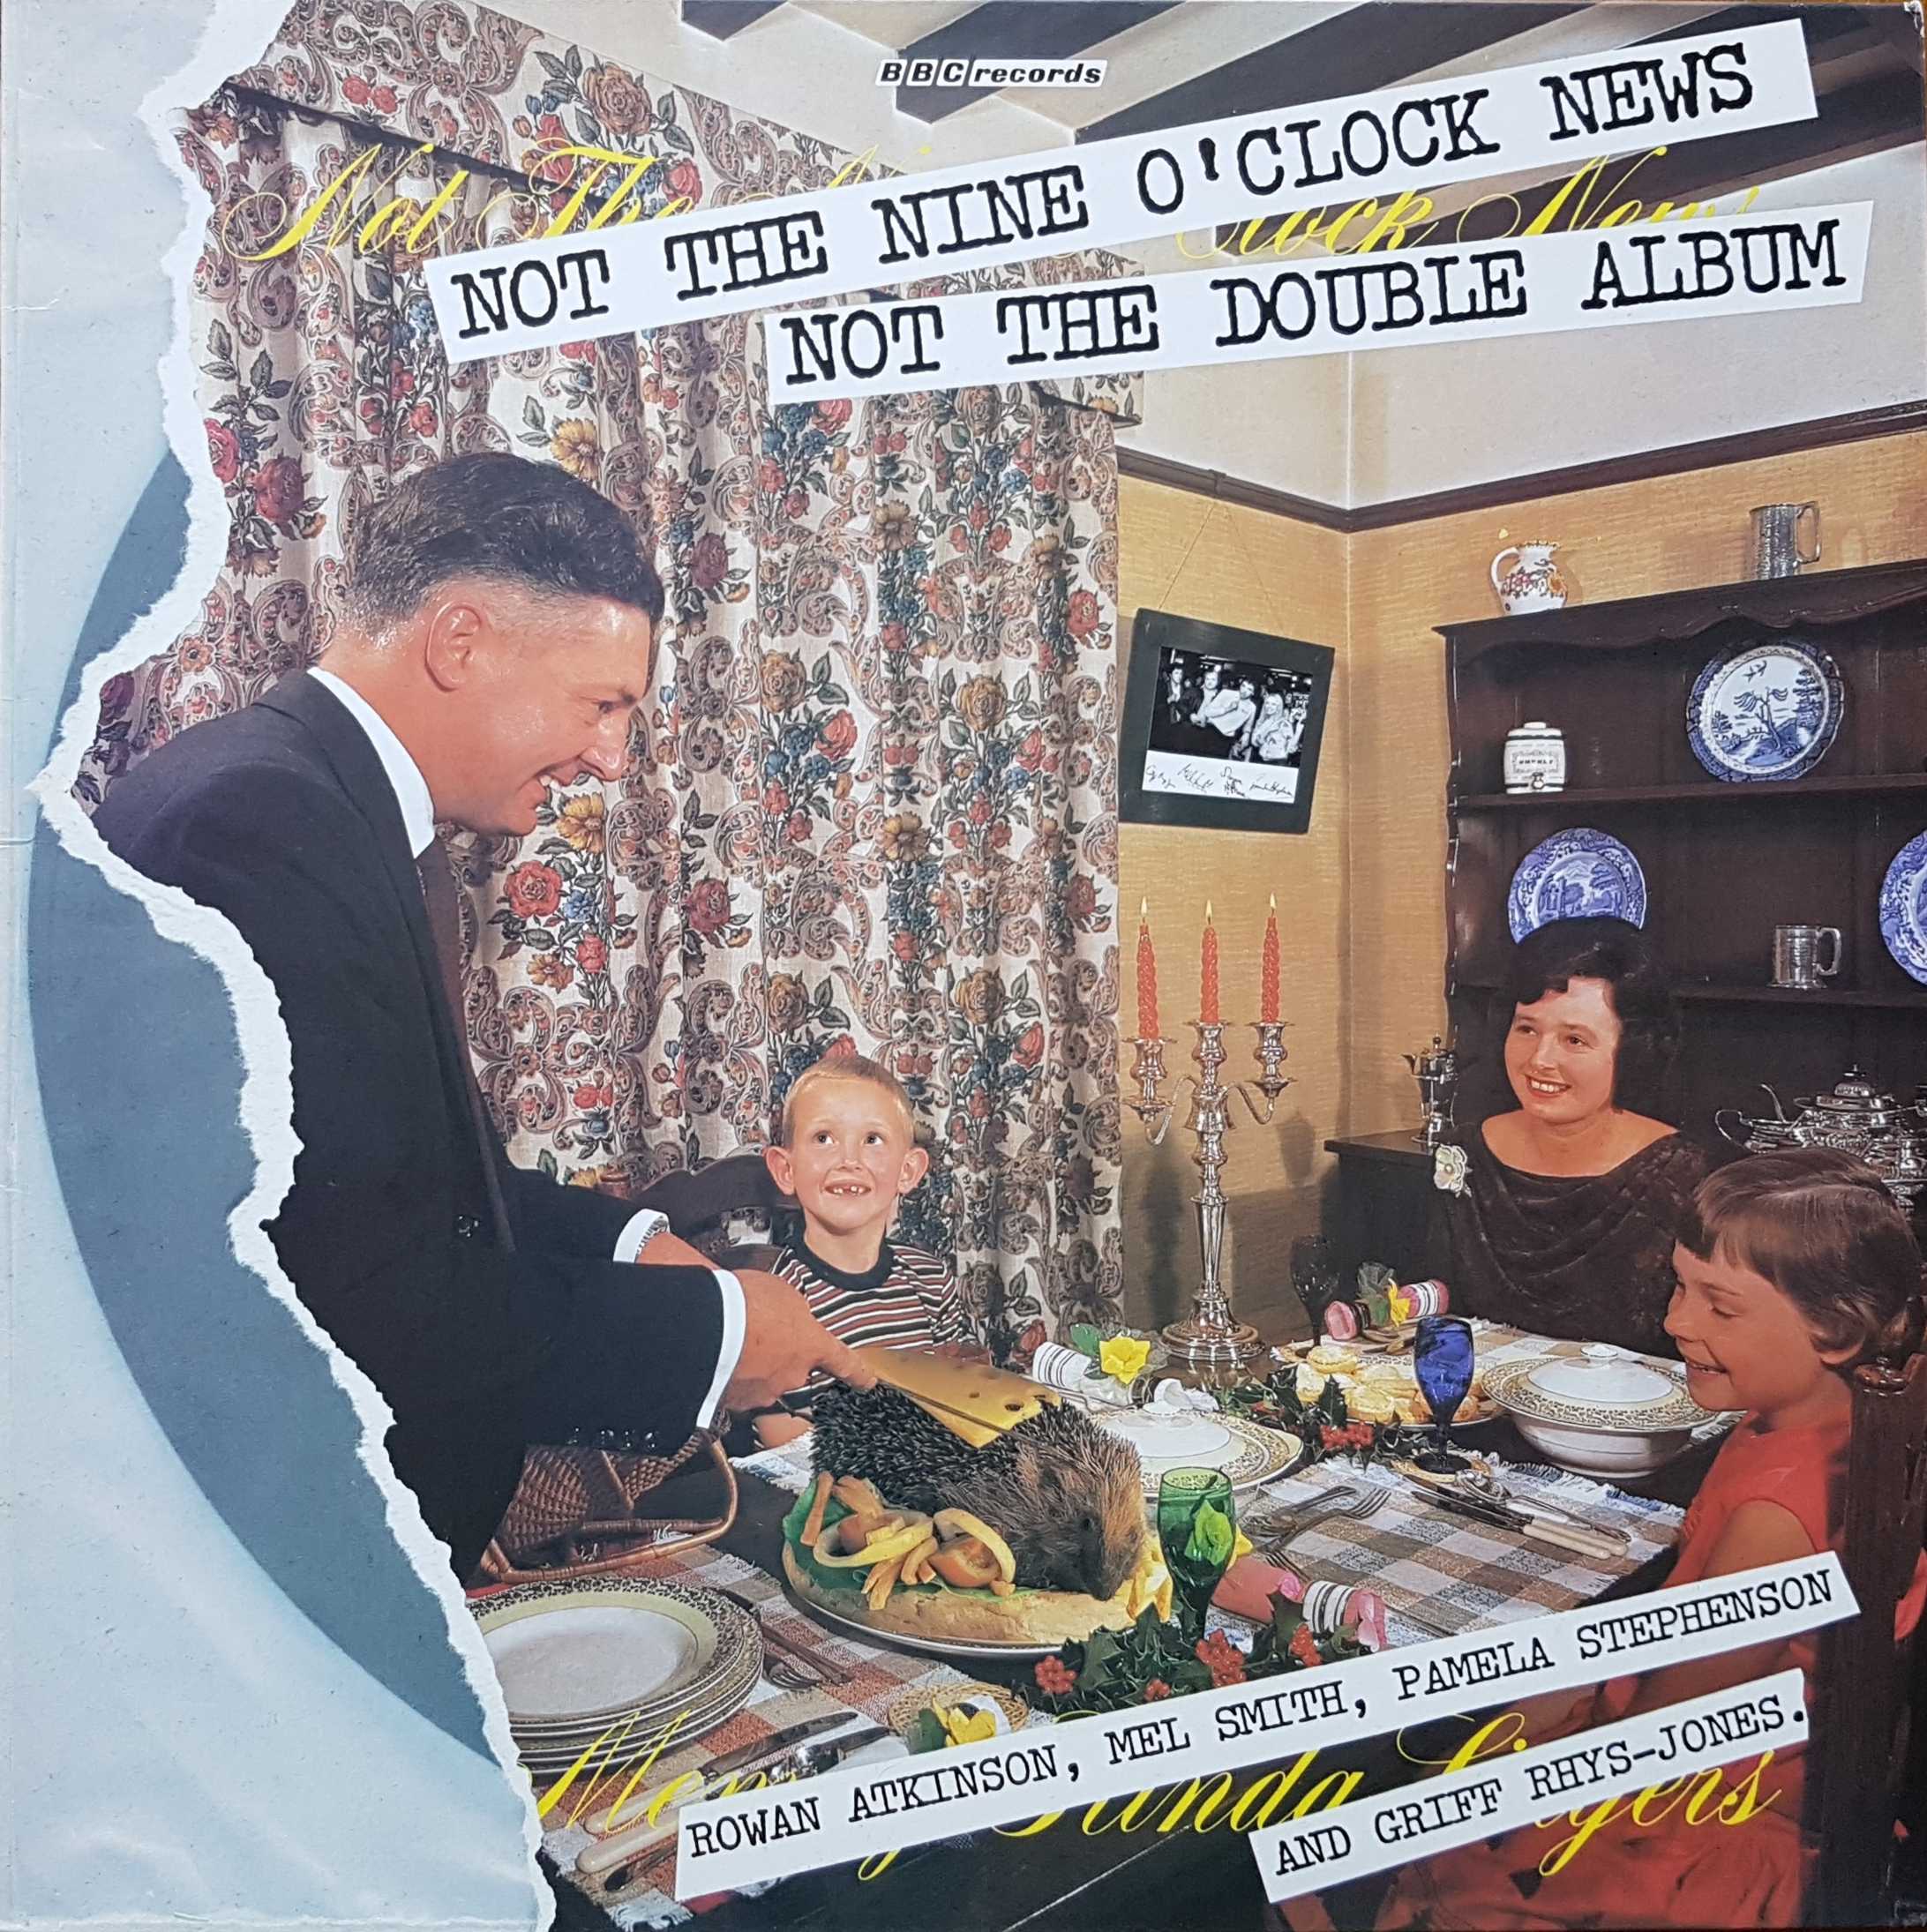 Picture of REH 516 Not the nine o'clock news - Not the double album by artist Various from the BBC albums - Records and Tapes library